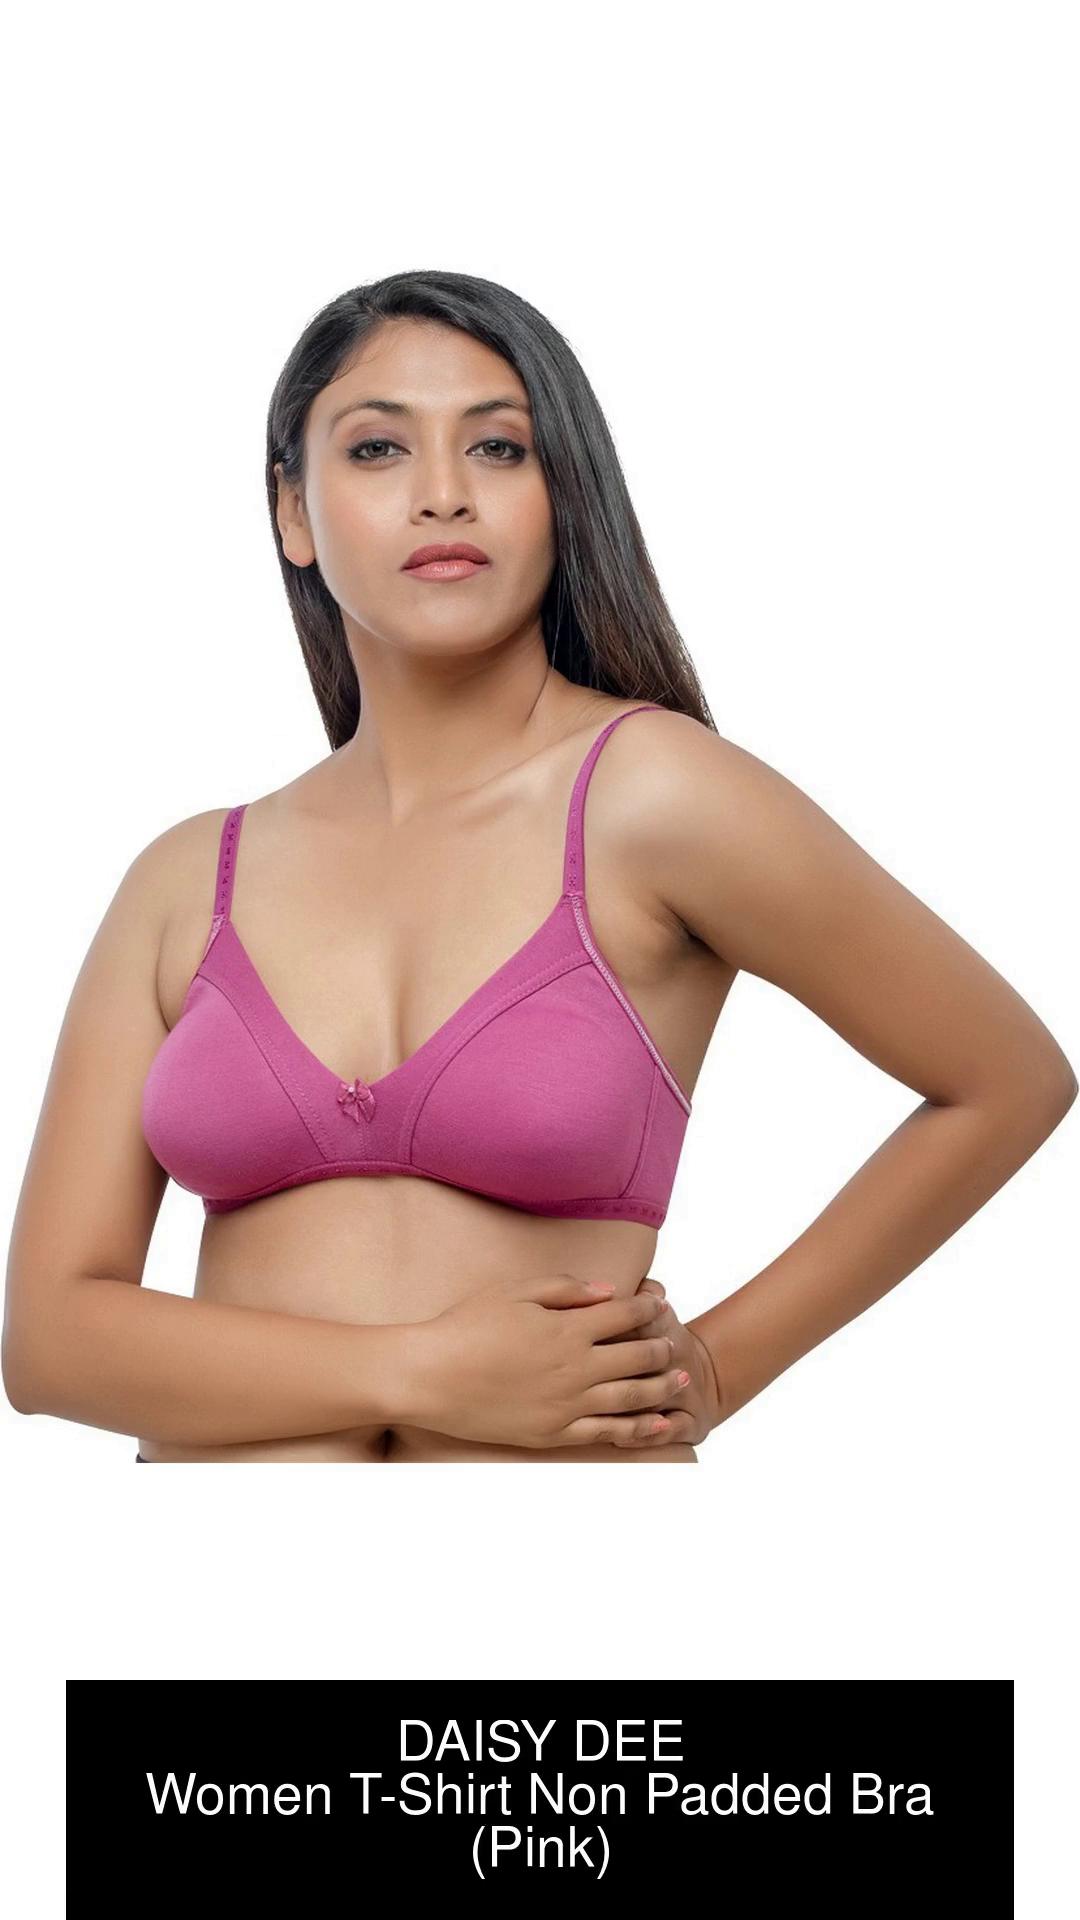 Buy DAISY DEE Women T-Shirt Non Padded Bra Online at Best Prices in India